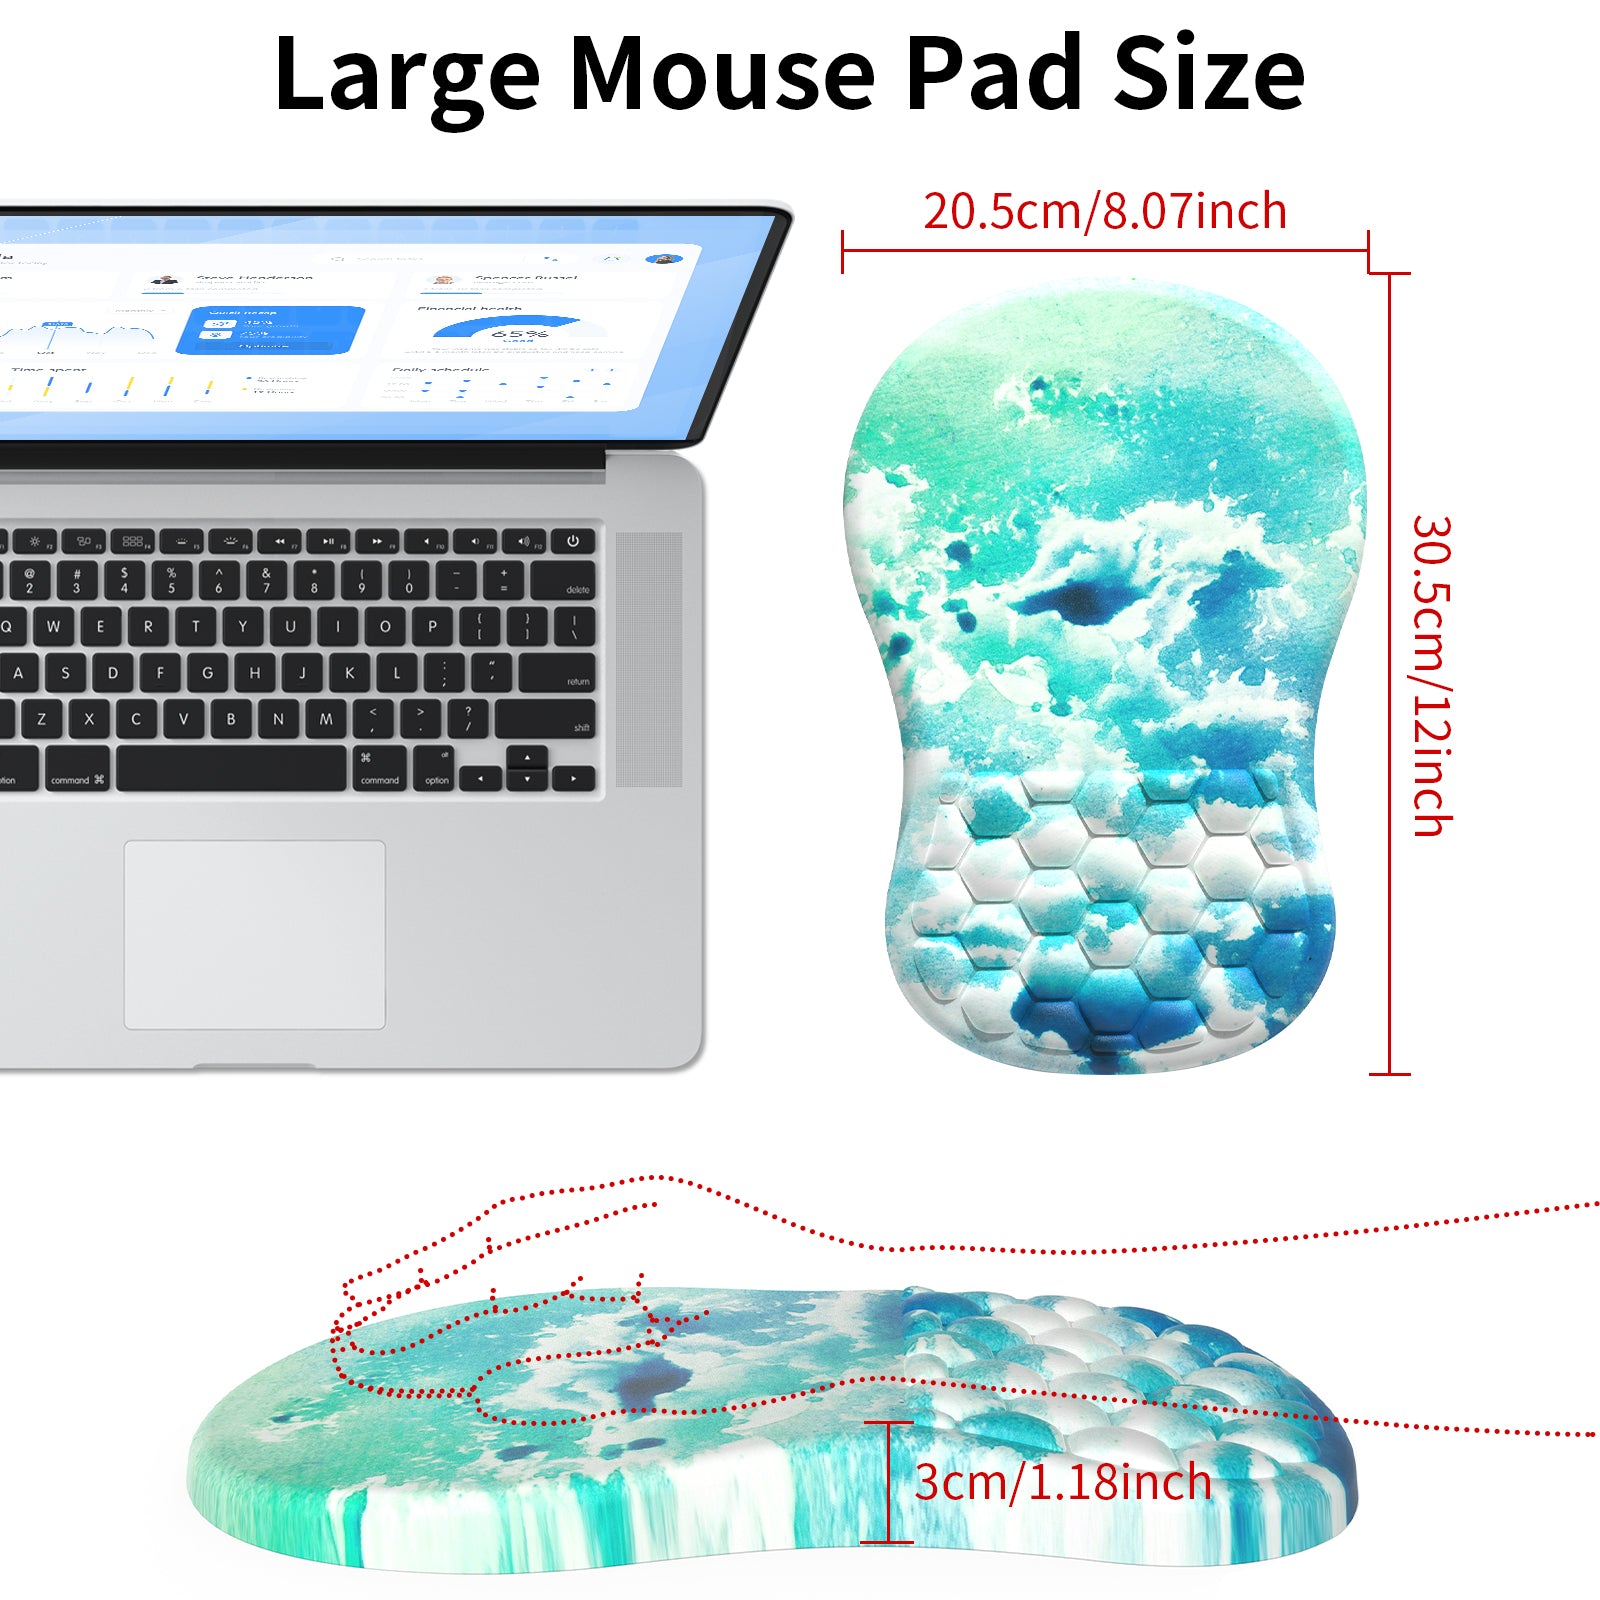 Giecy Ergonomic Mouse Pad Wrist Support, Wrist Rest Pain Relief Mousepad Memory Foam with Massage Design, Non-Slip PU Base, Mouse Pads for Home Office